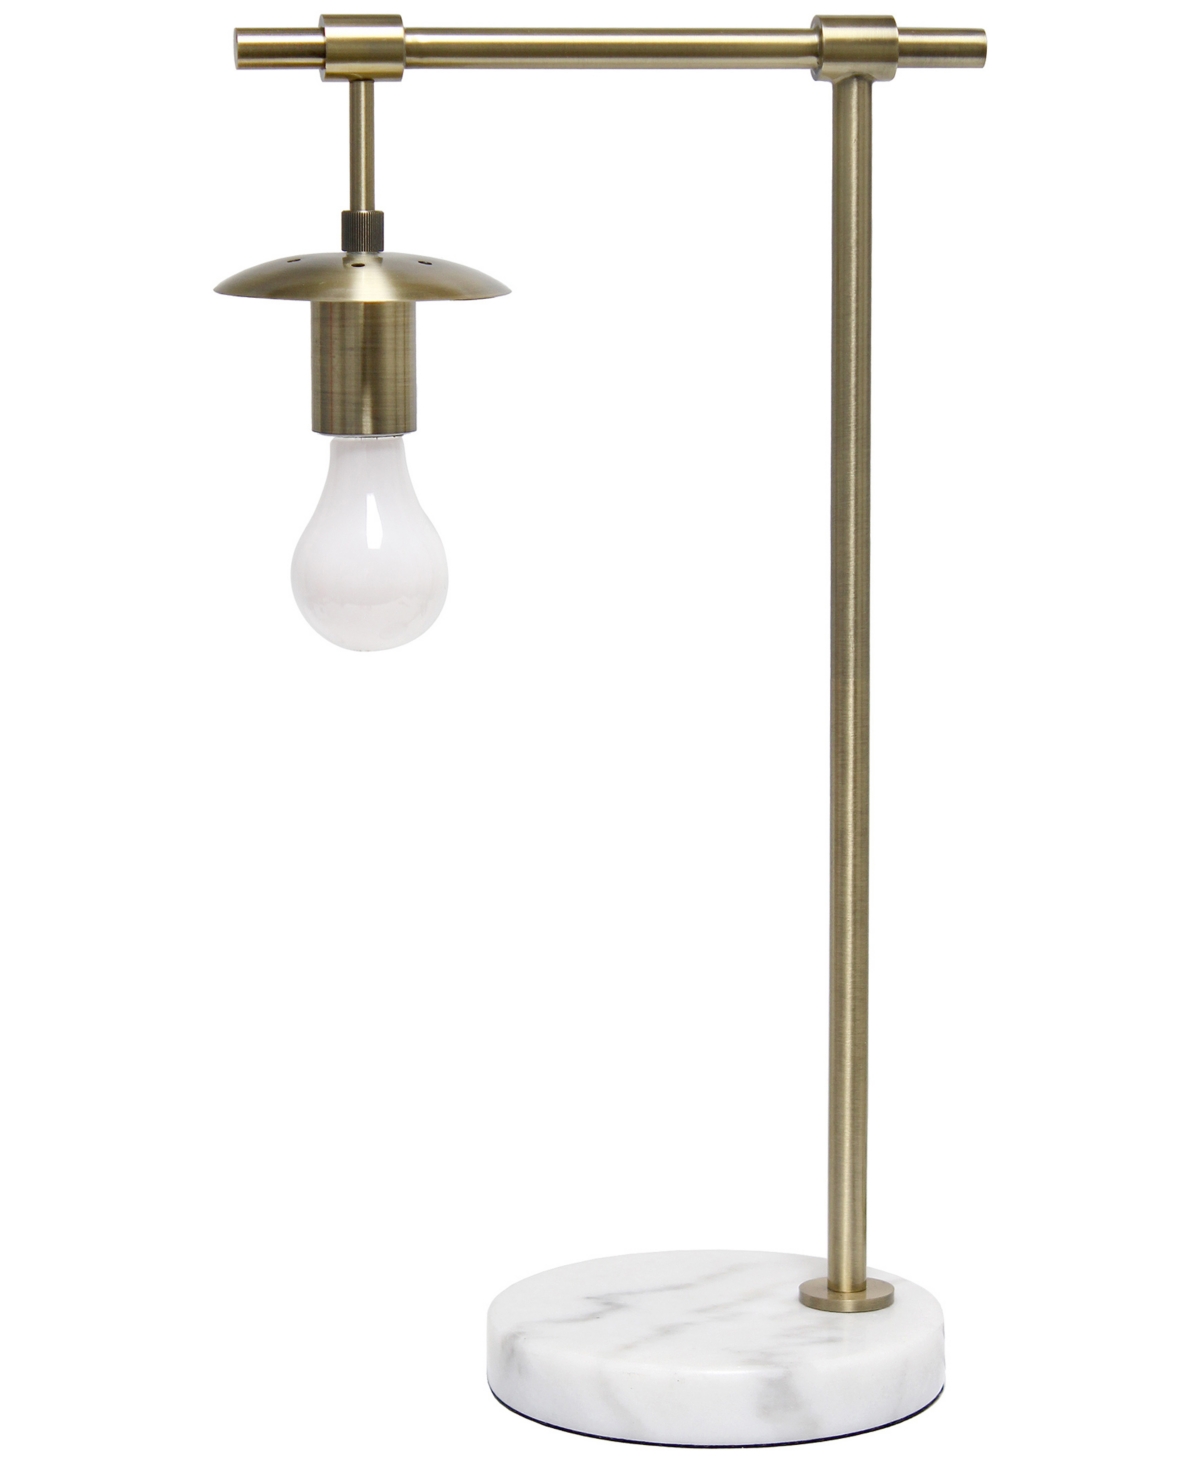 Shop Lalia Home Studio Loft 21" White Globe Shade Table Desk Lamp With Marble Base And Antique Brass Arm